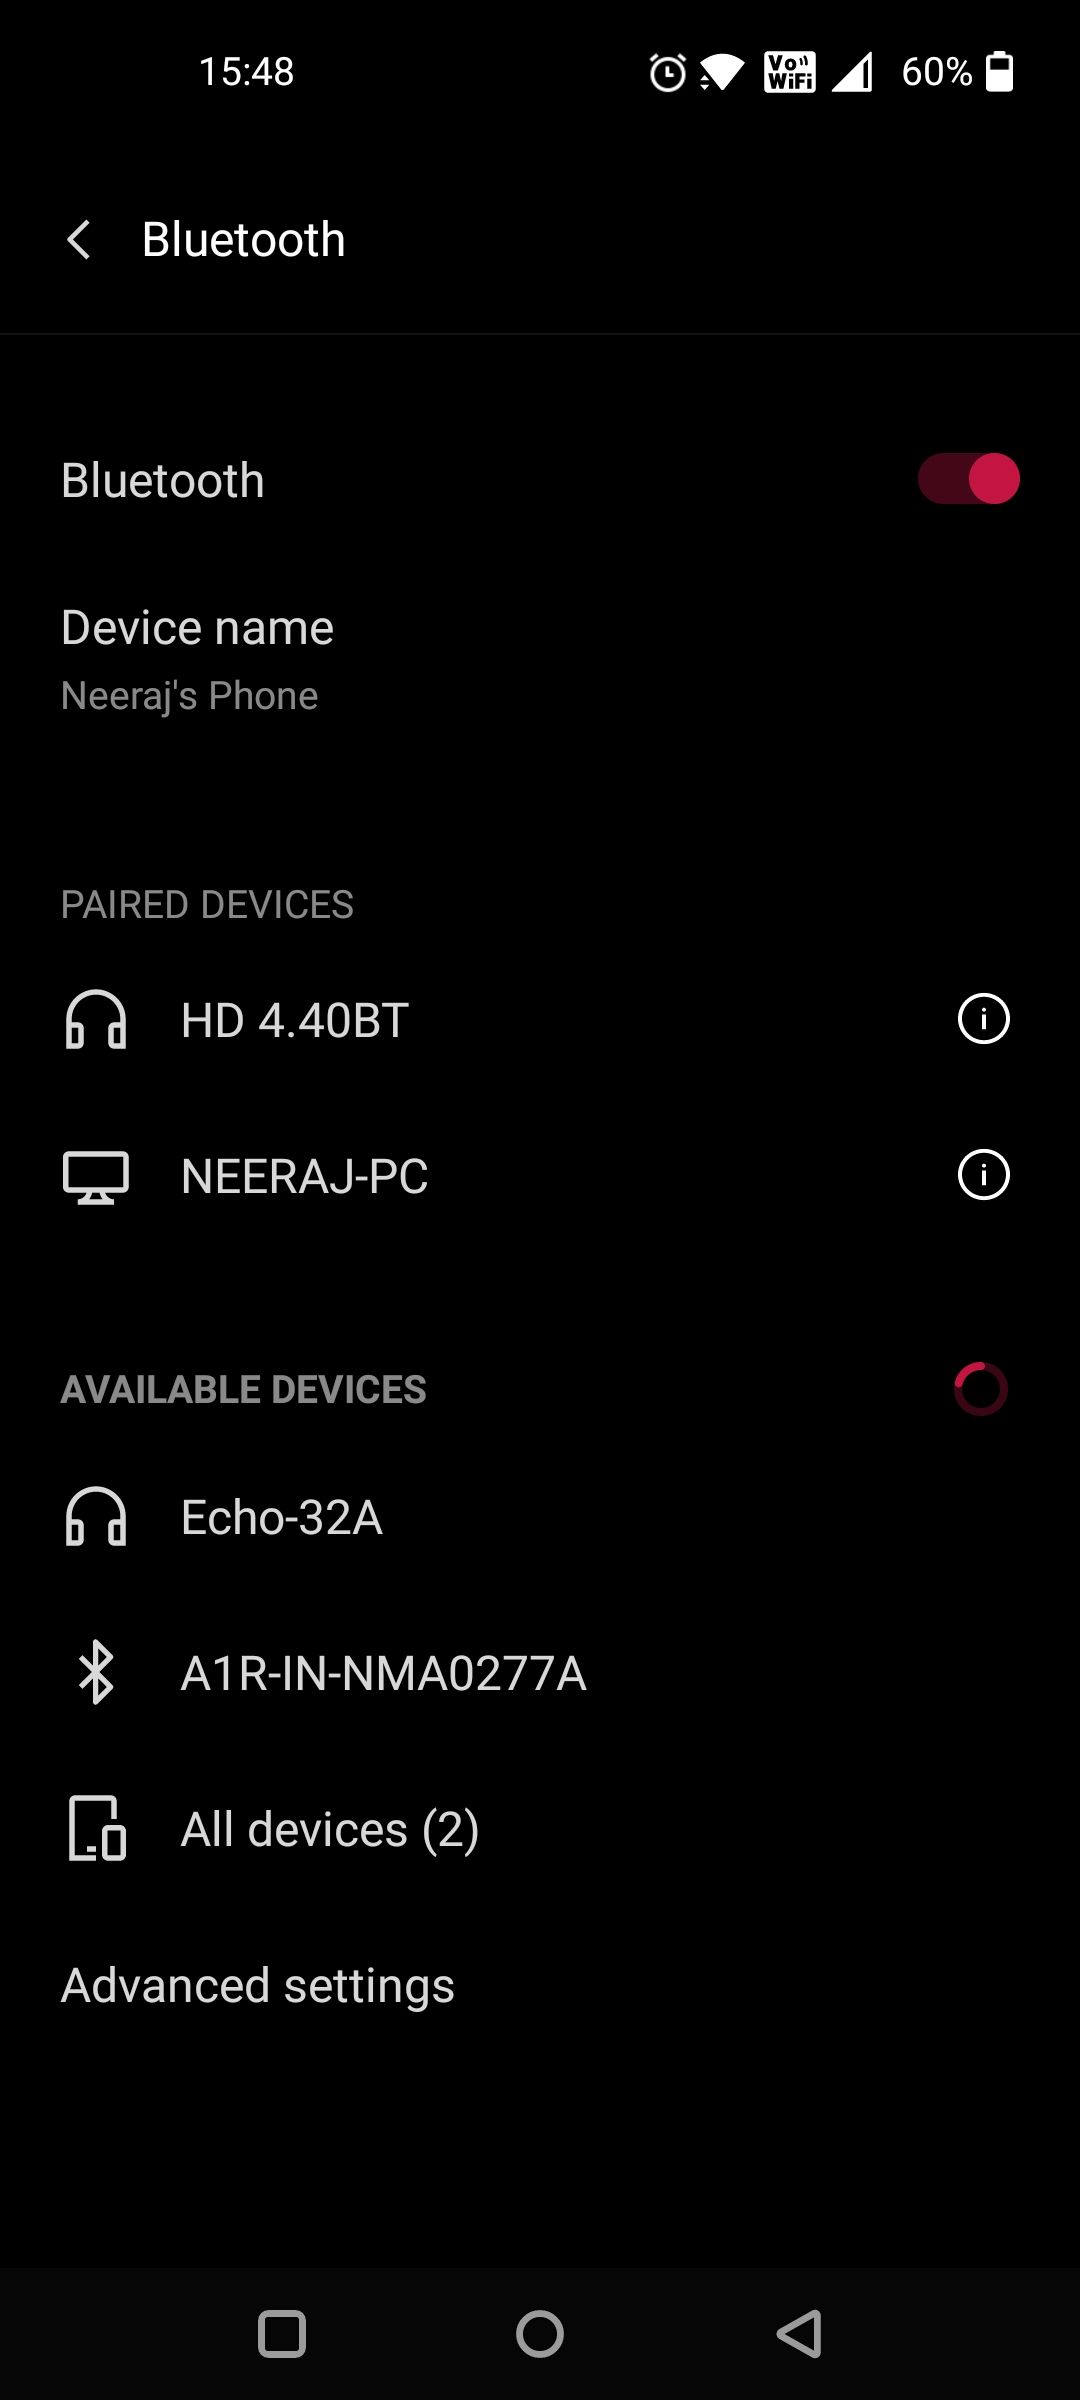 Echo Showing Under Available Devices in Bluetooth Settings